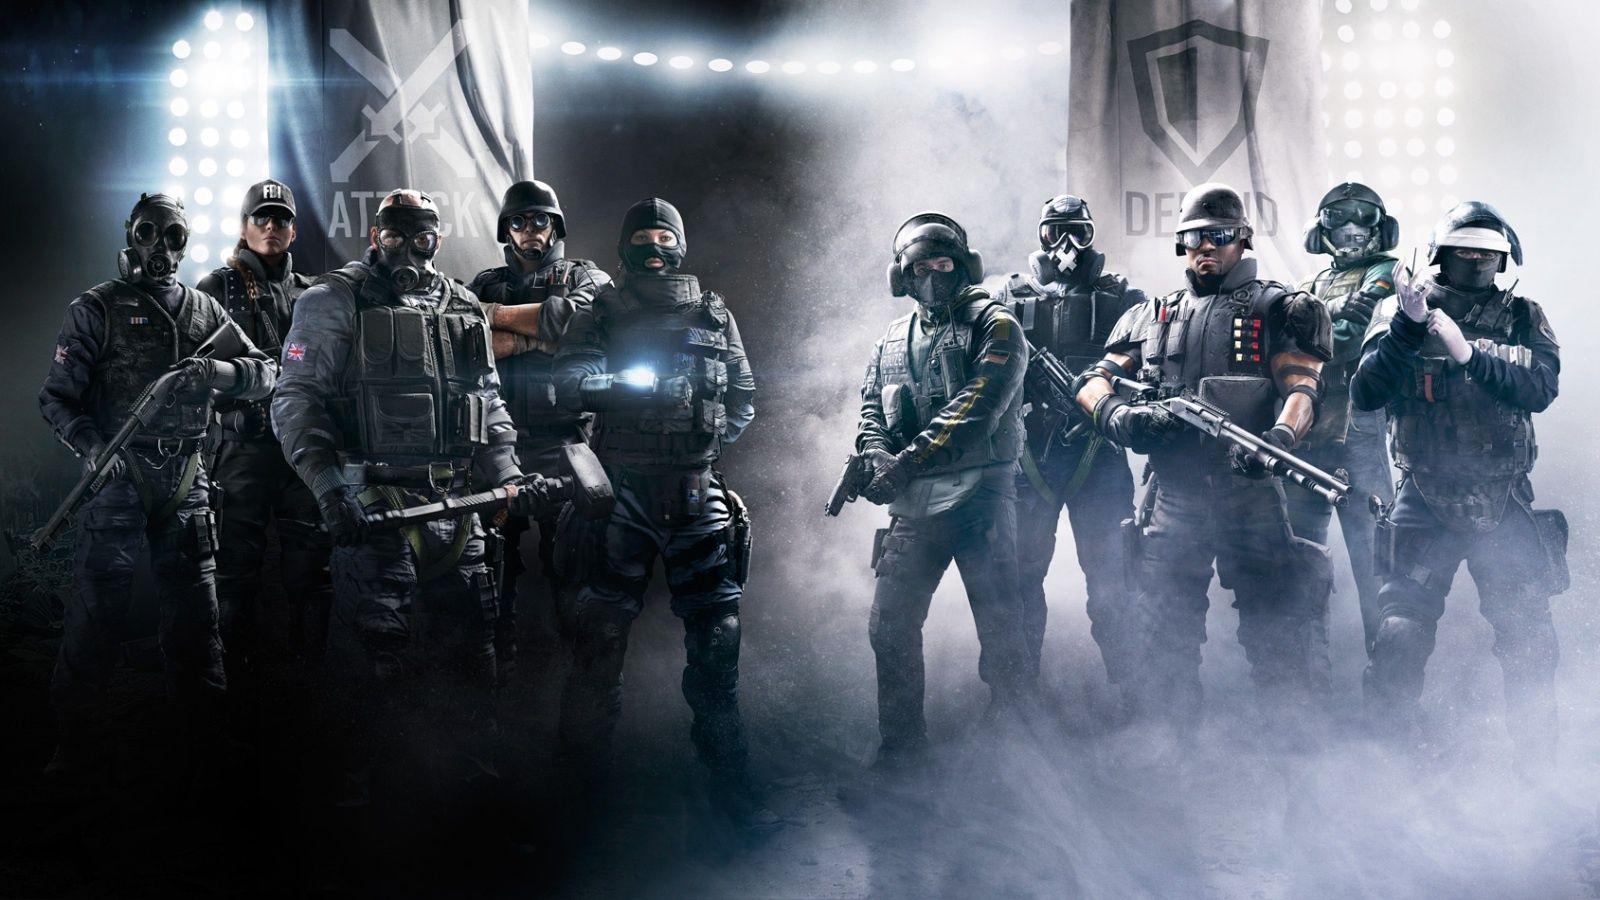 Attack And Defend Tom Clancy's Rainbow Six Siege Wallpapers